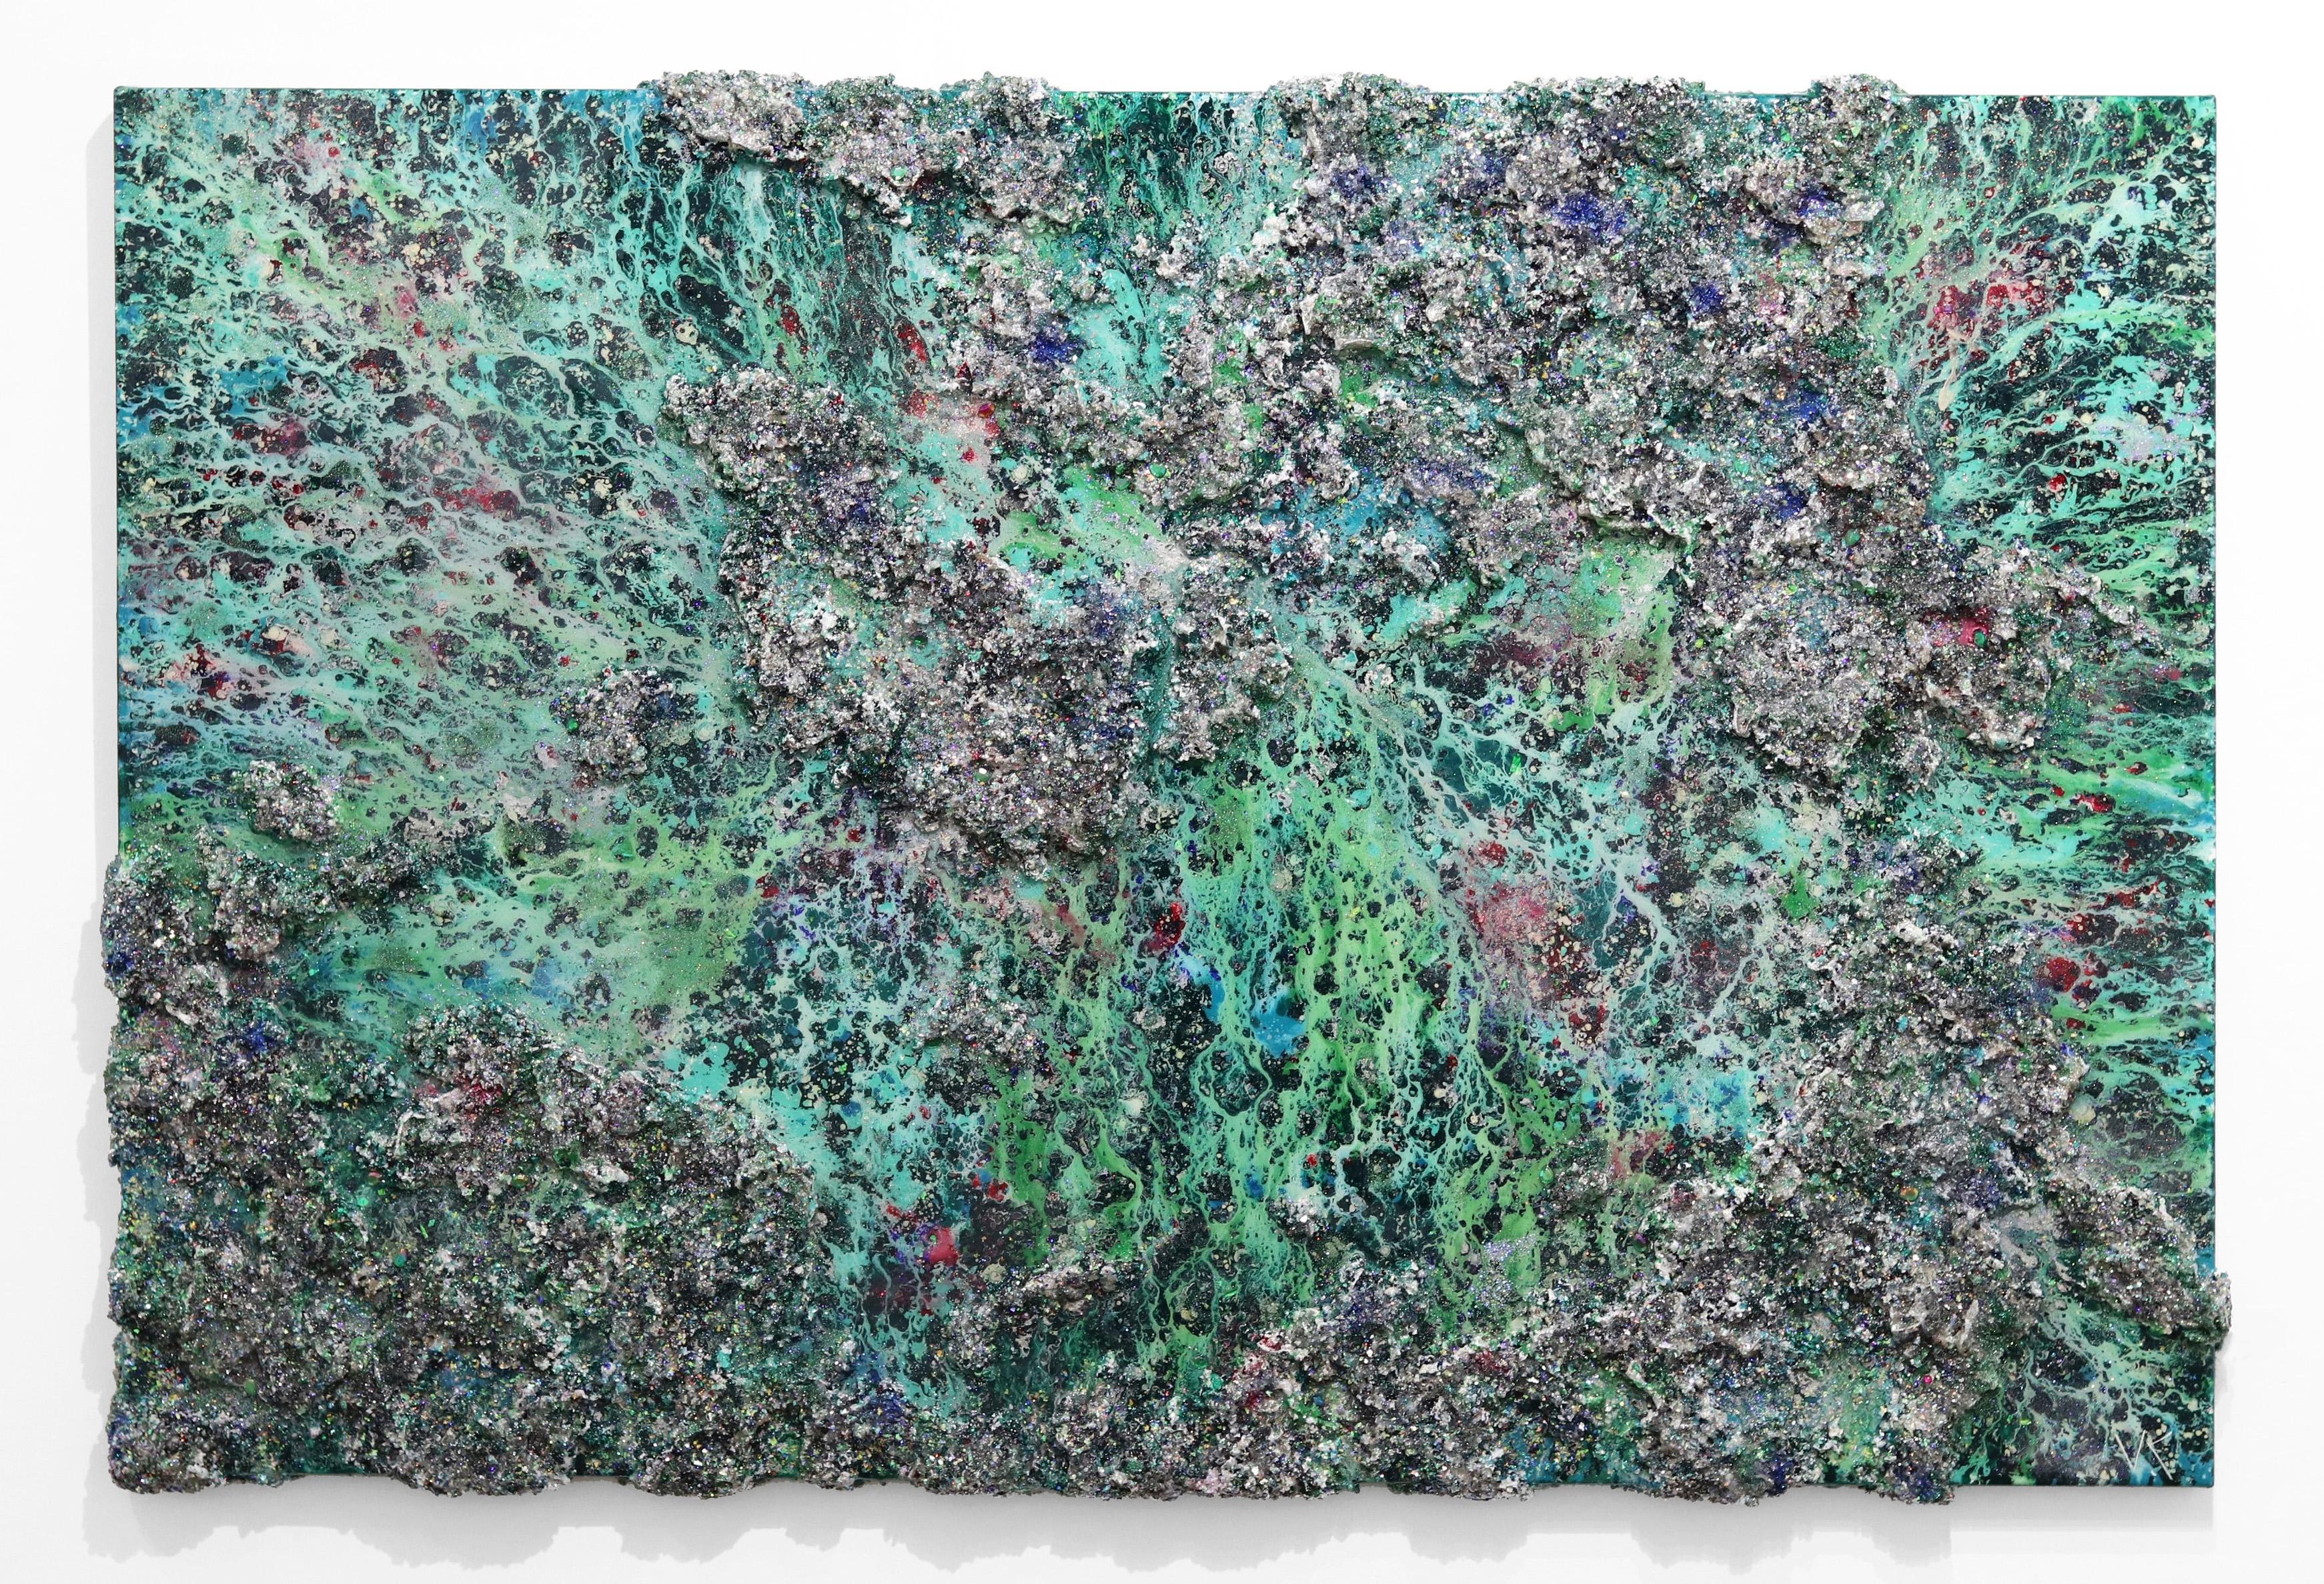 The World VI-II - Large Sculptural Green Oil, Mixed Media, and Resin Painting